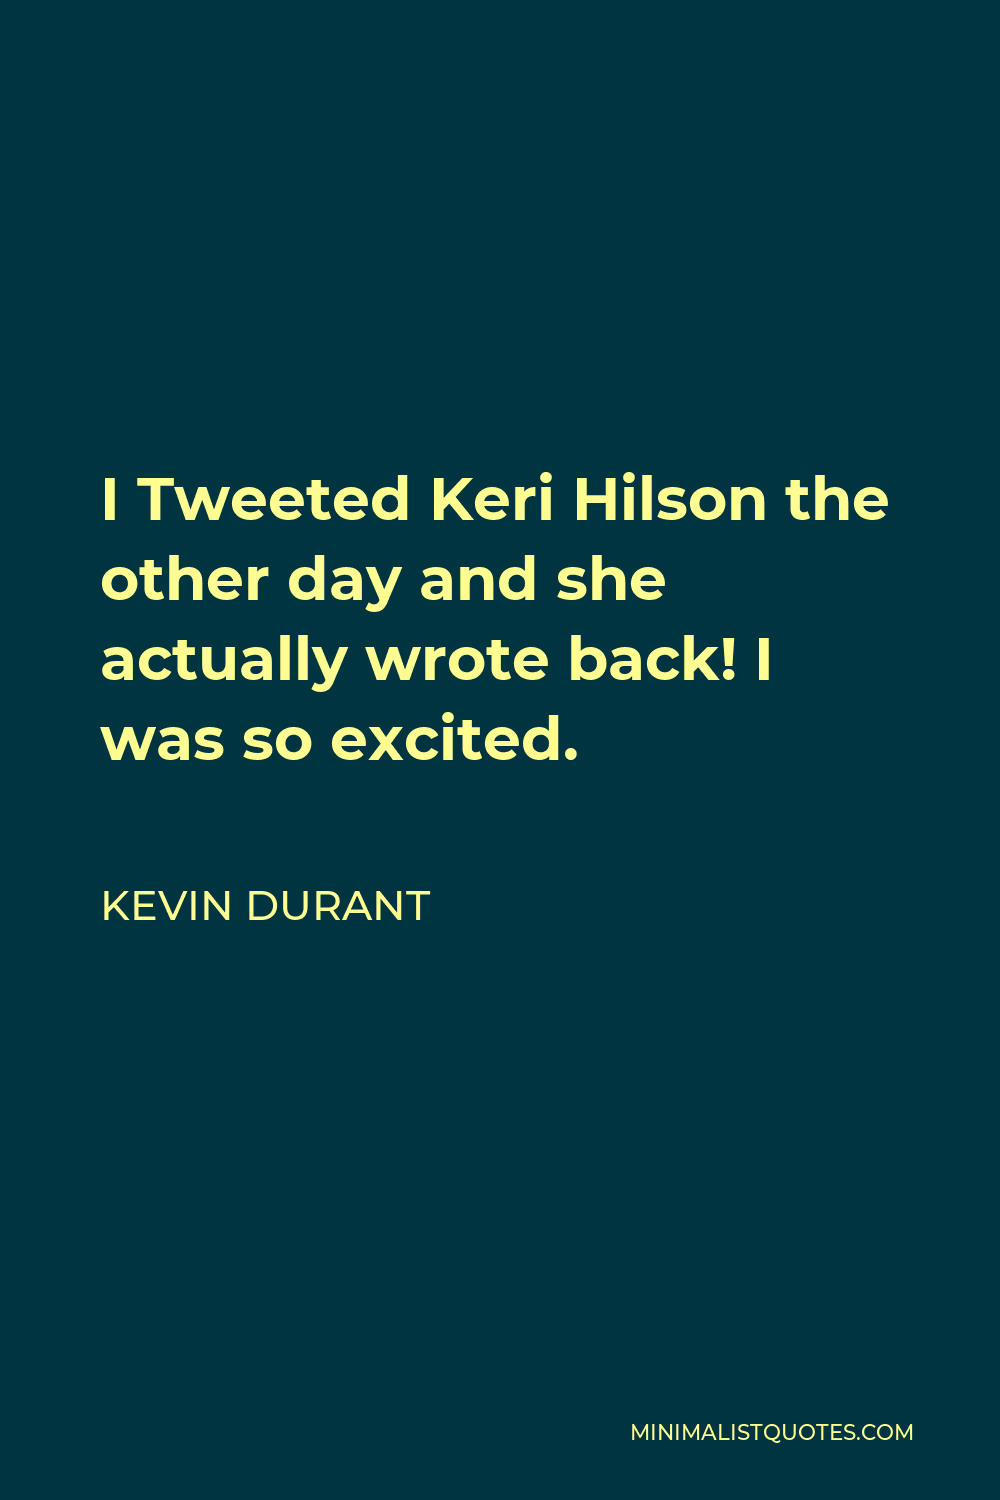 Kevin Durant Quote - I Tweeted Keri Hilson the other day and she actually wrote back! I was so excited.